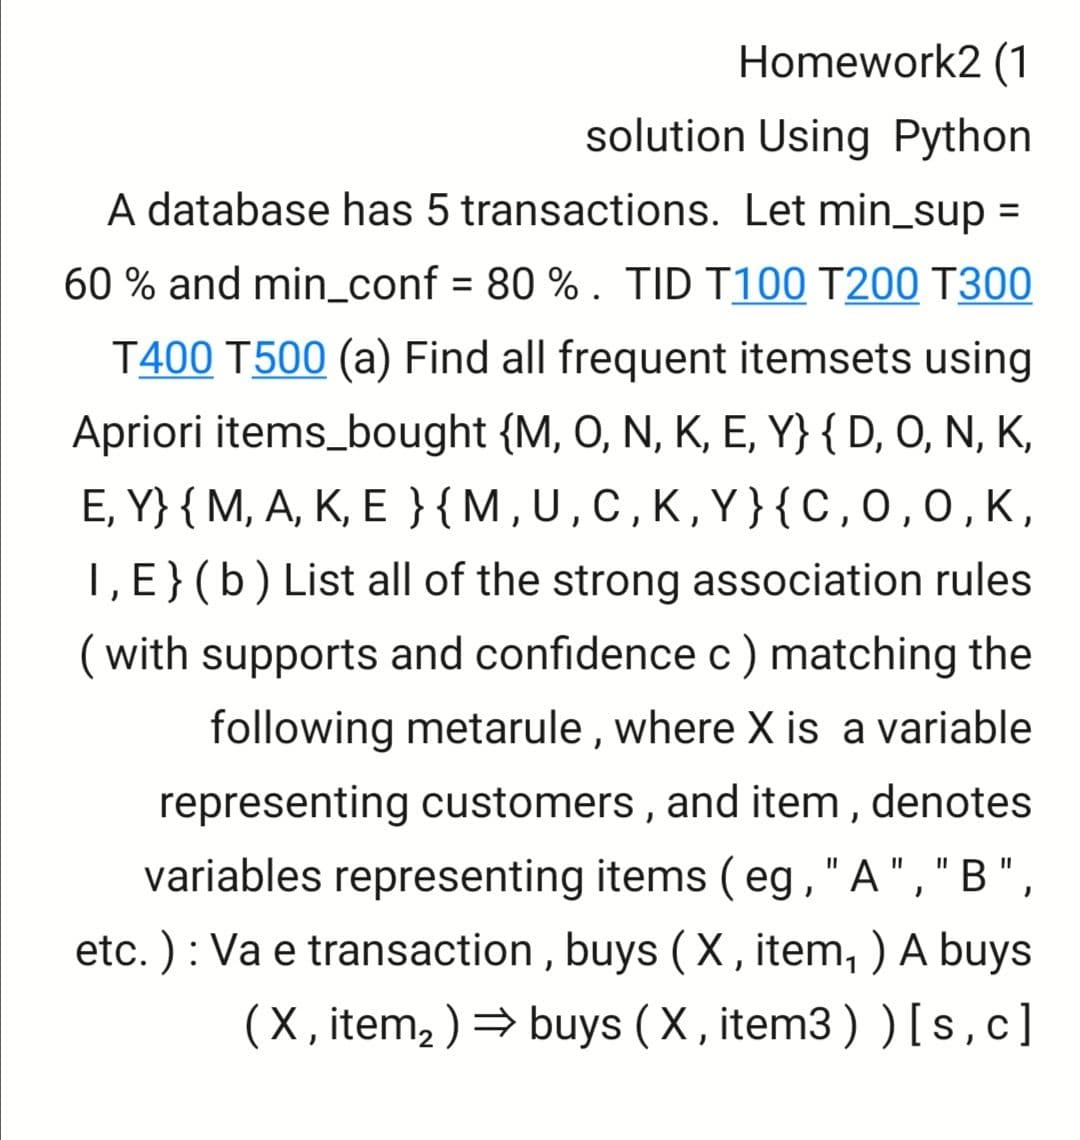 Homework2 (1
solution Using Python
A database has 5 transactions. Let min_sup =
60 % and min_conf = 80 % . TID T100 T200 T300
T400 T500 (a) Find all frequent itemsets using
Apriori items_bought {M, O, N, K, E, Y} { D, O, N, K,
E, Y} { M, A, K, E }{M,U,C,K,Y}{C,0,0,K,
1, E}(b) List all of the strong association rules
(with supports and confidence c) matching the
following metarule , where X is a variable
representing customers , and item , denotes
variables representing items ( eg,"A","B",
etc. ) : Va e transaction , buys ( X , item, ) A buys
(X, item, ) → buys ( X , item3 ) ) [s,c]
II
